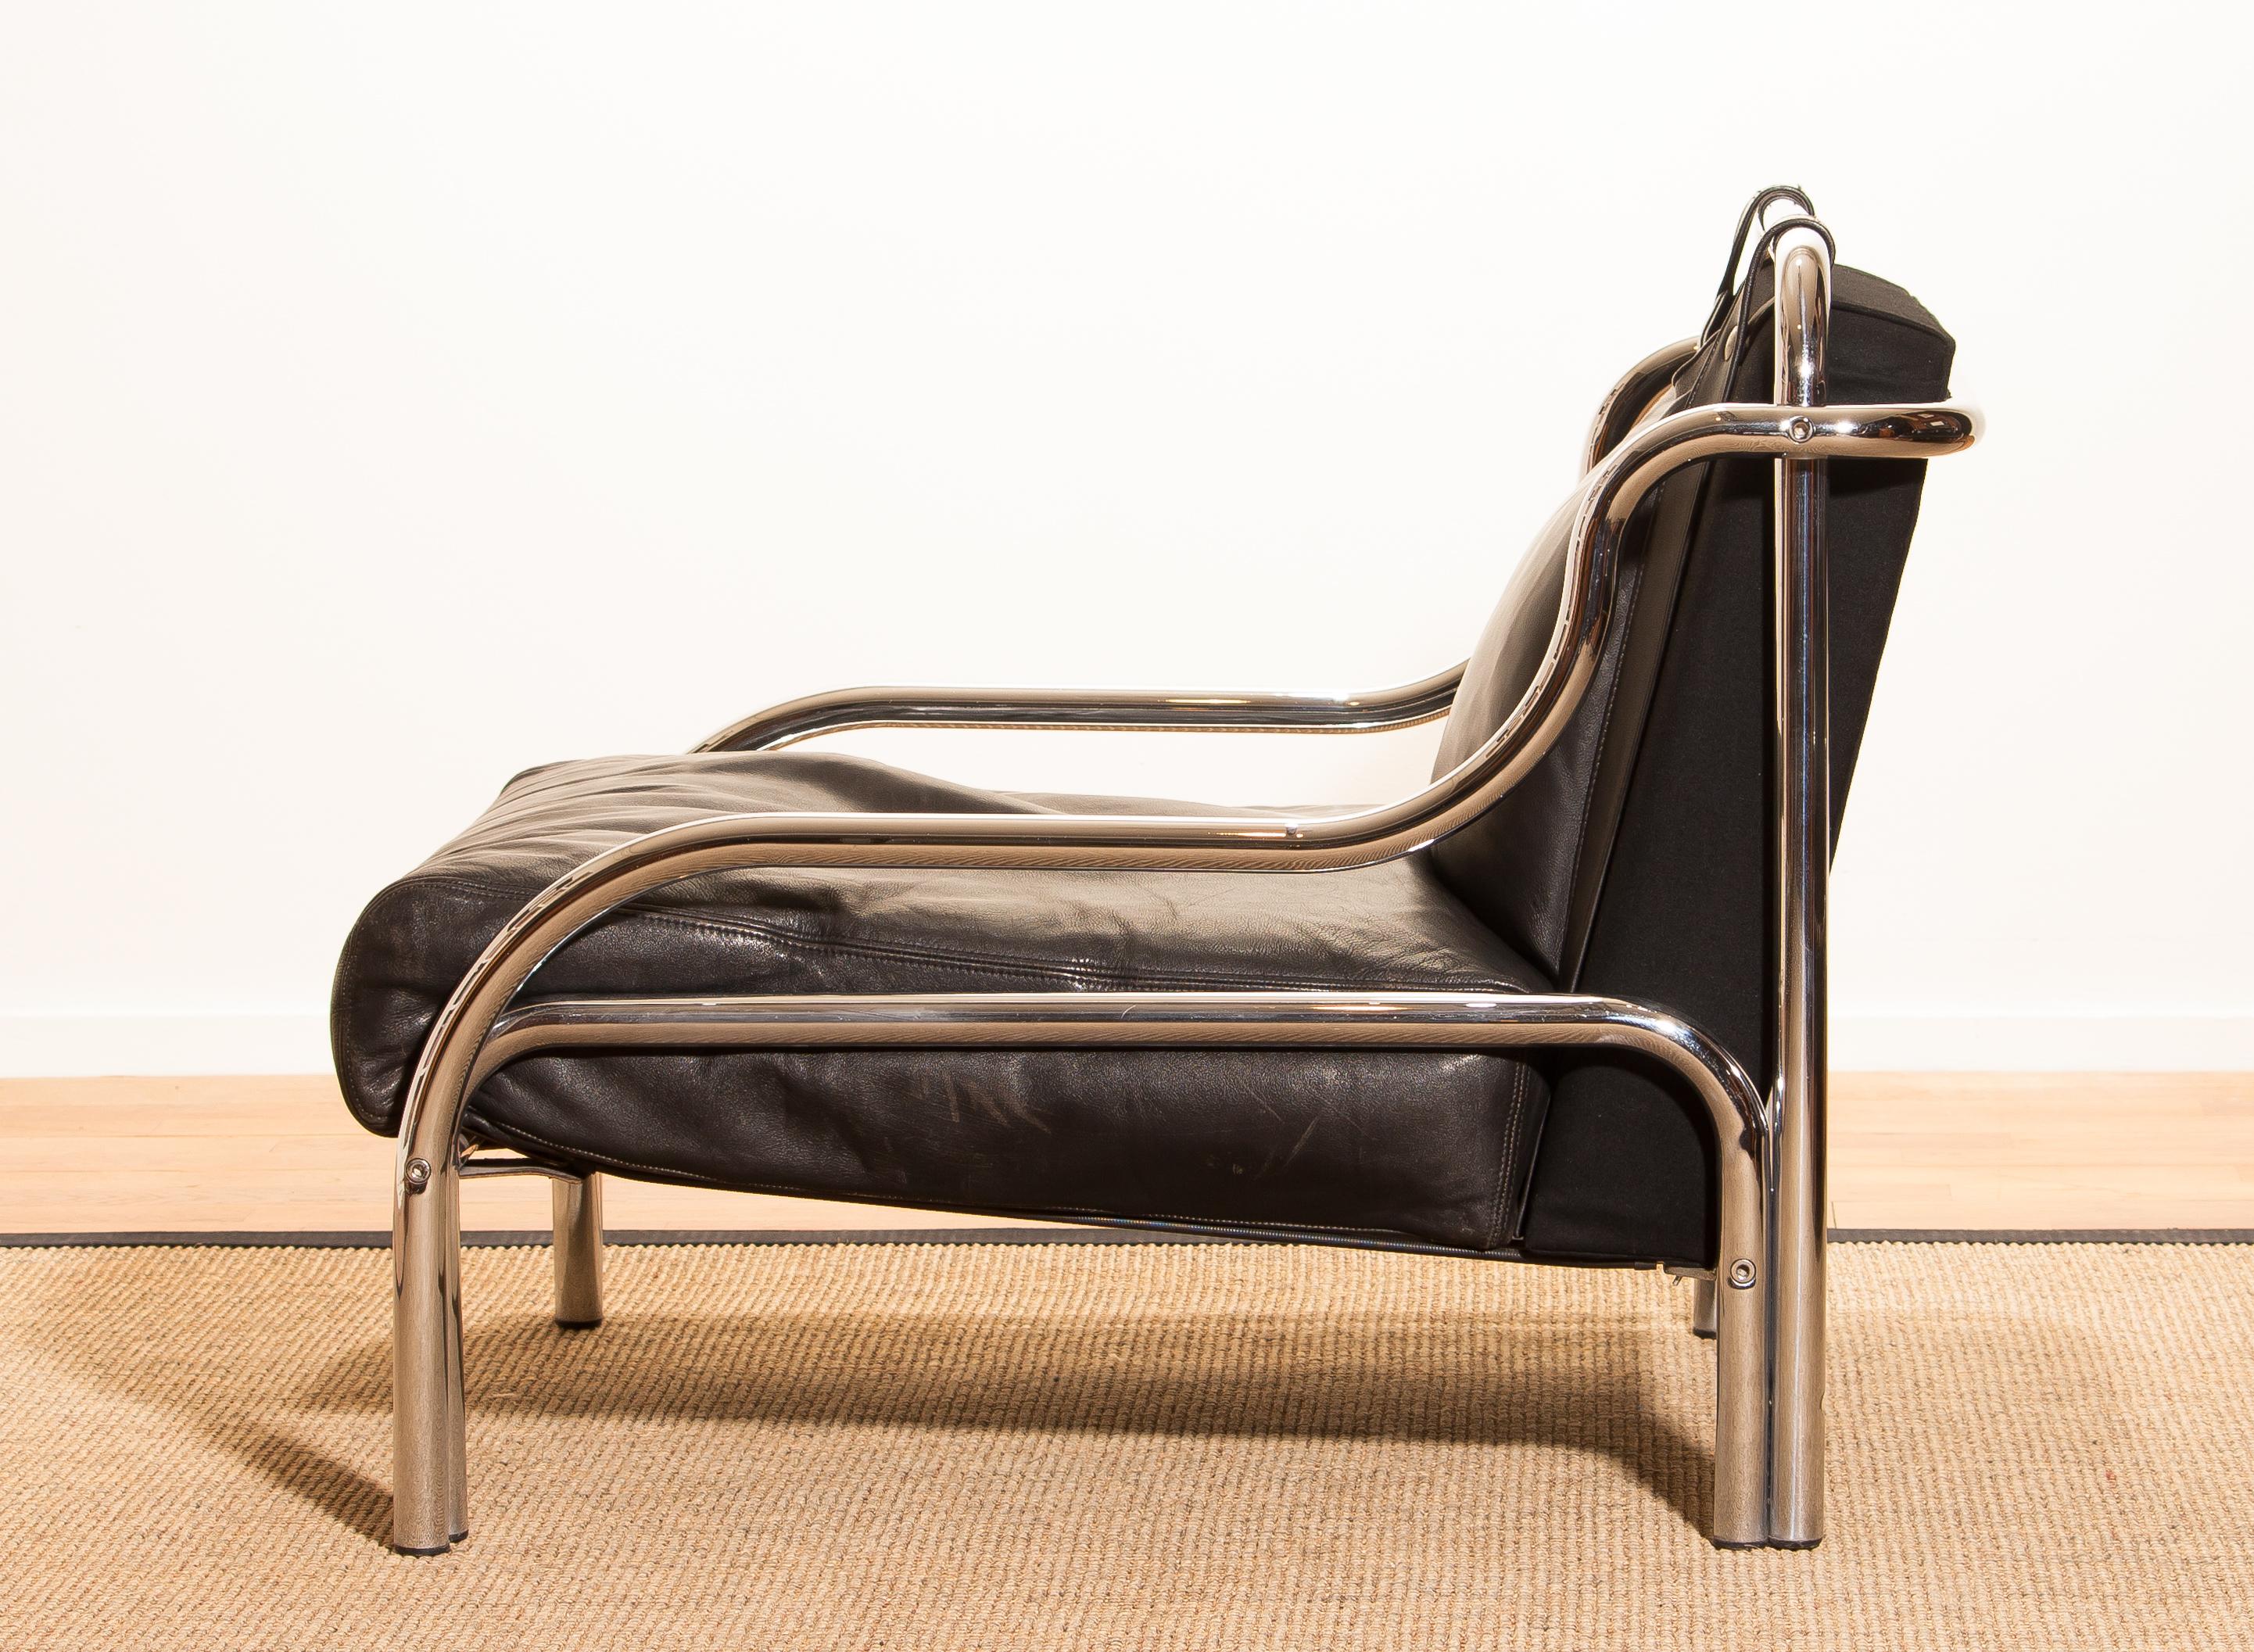 1960s Leather and Chrome Lounge Chair by Gae Aulenti for Poltronova 4